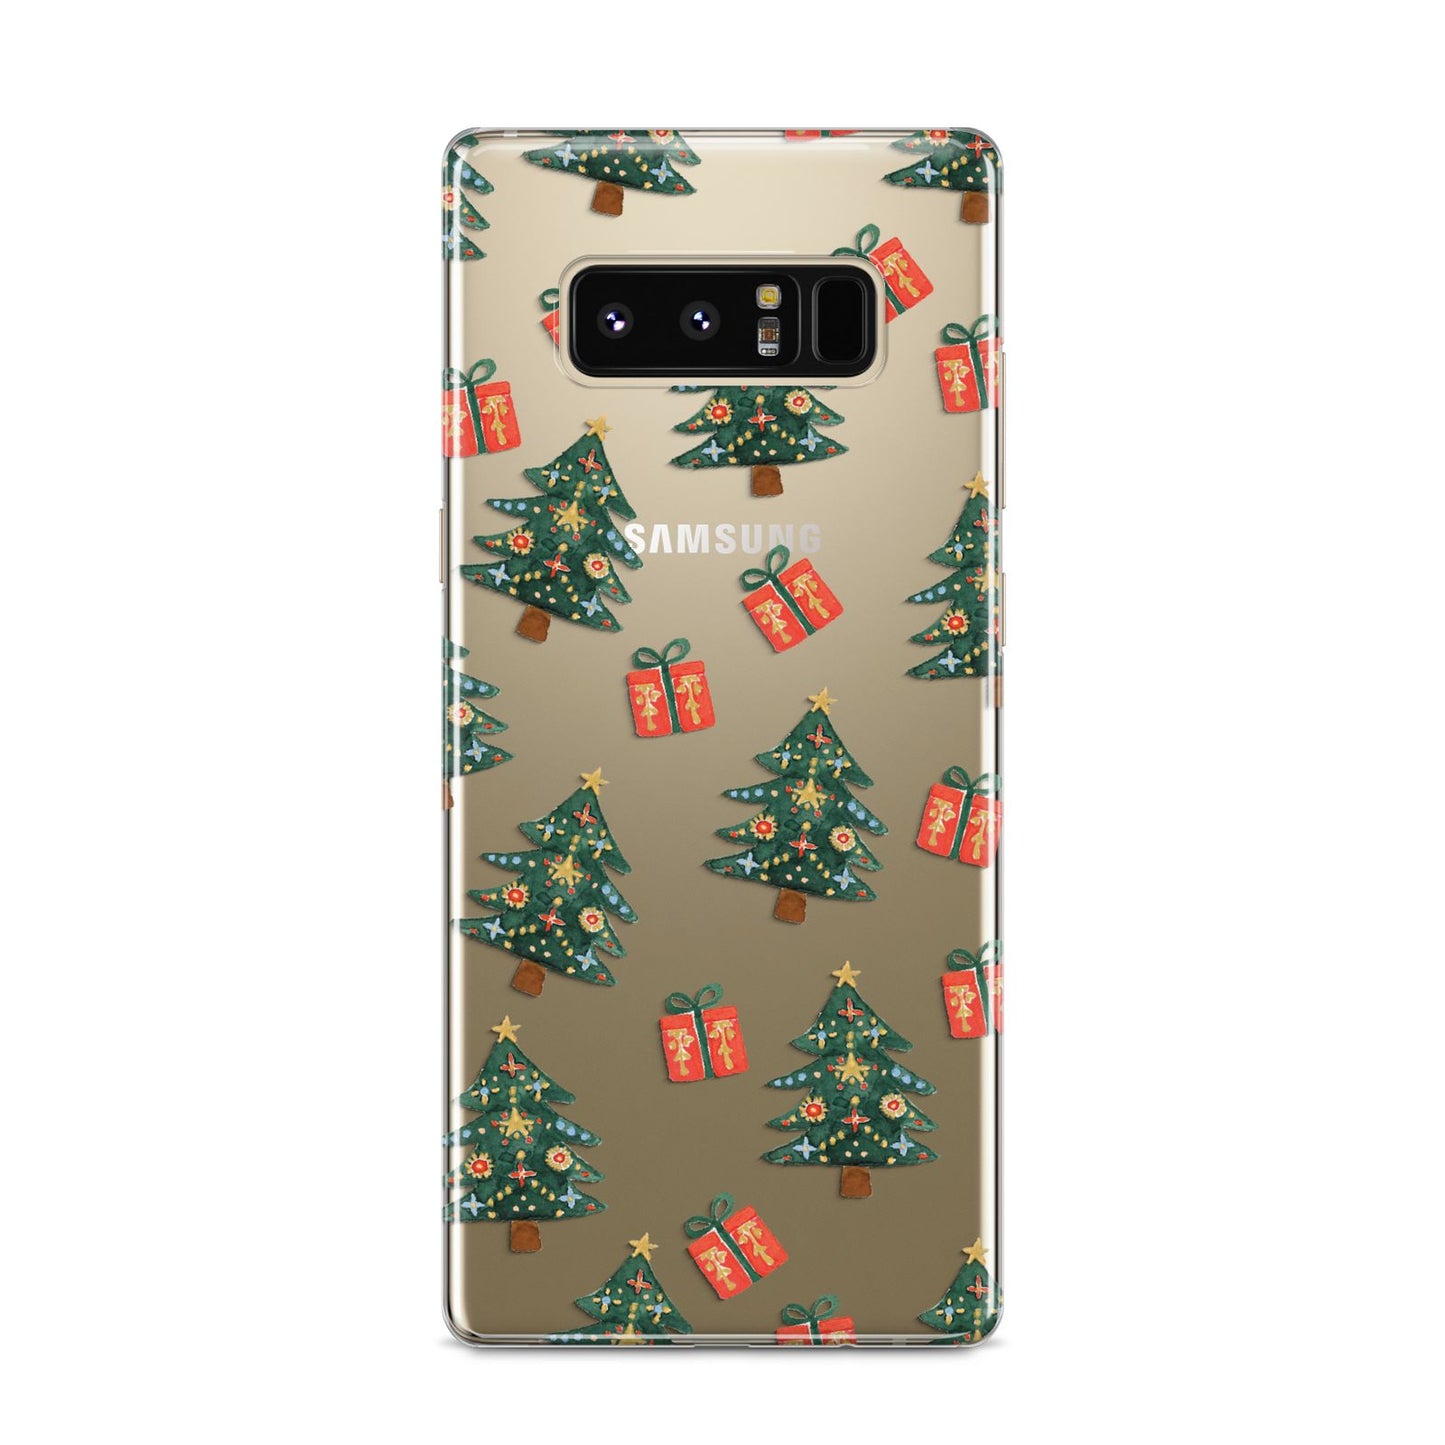 Christmas tree and presents Samsung Galaxy S8 Case